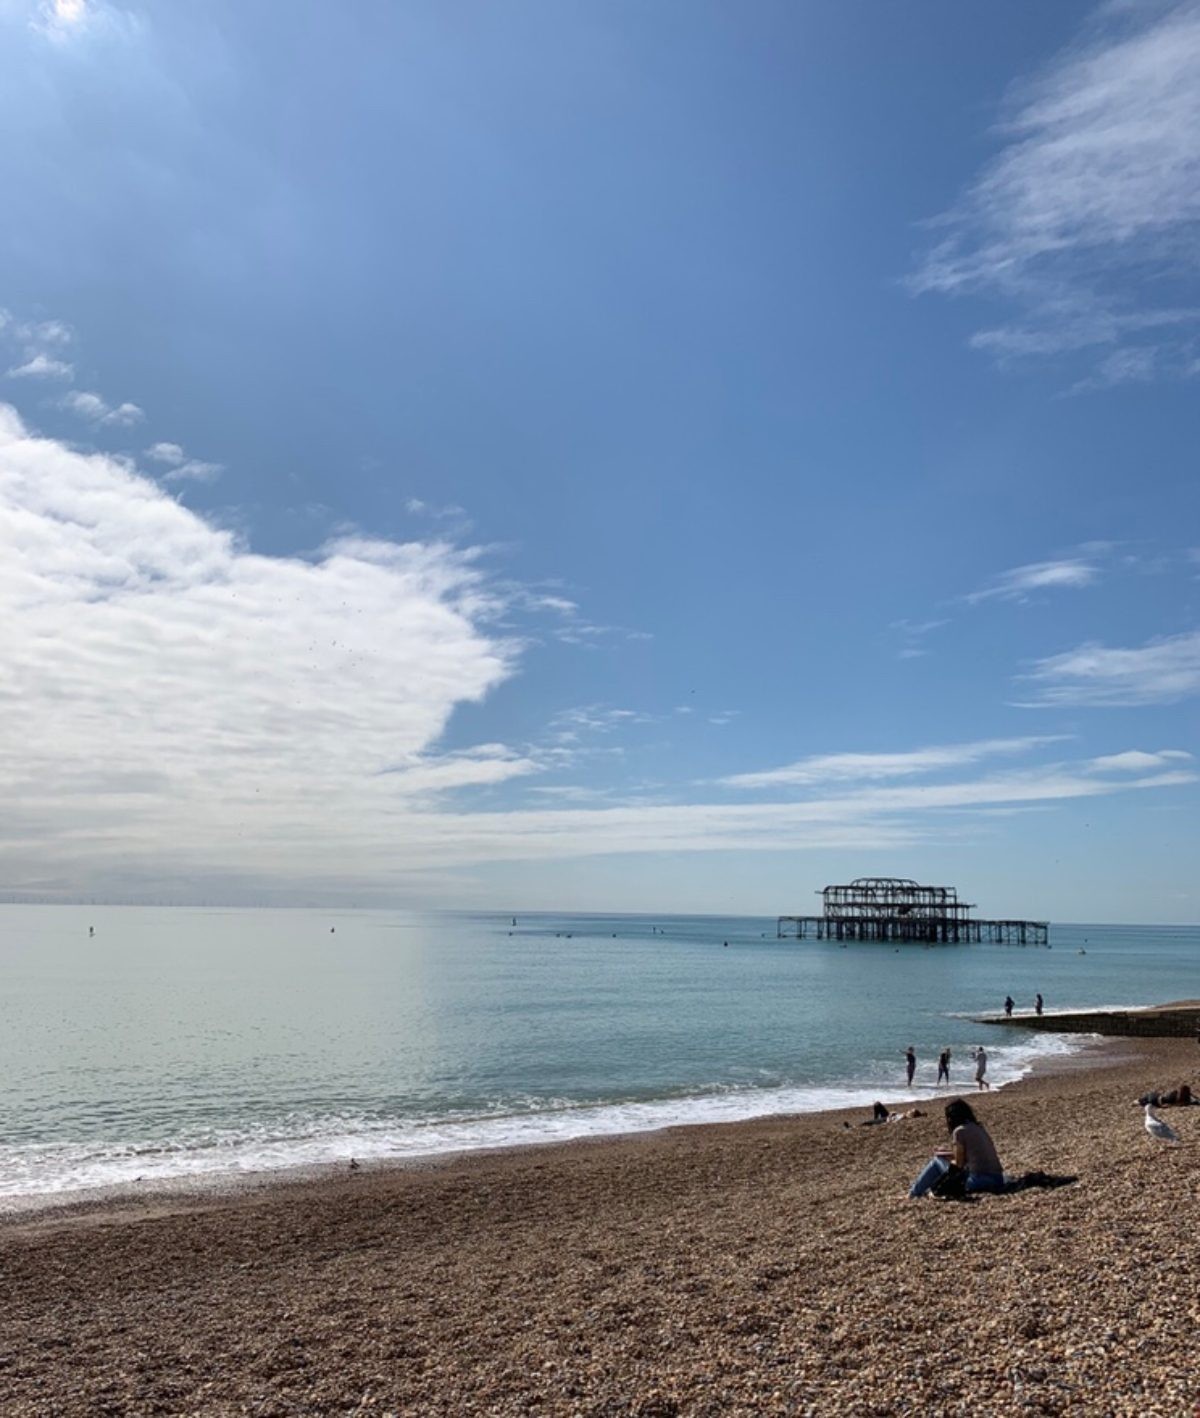 BrightonSEO 2019 – Insights and Takeaways